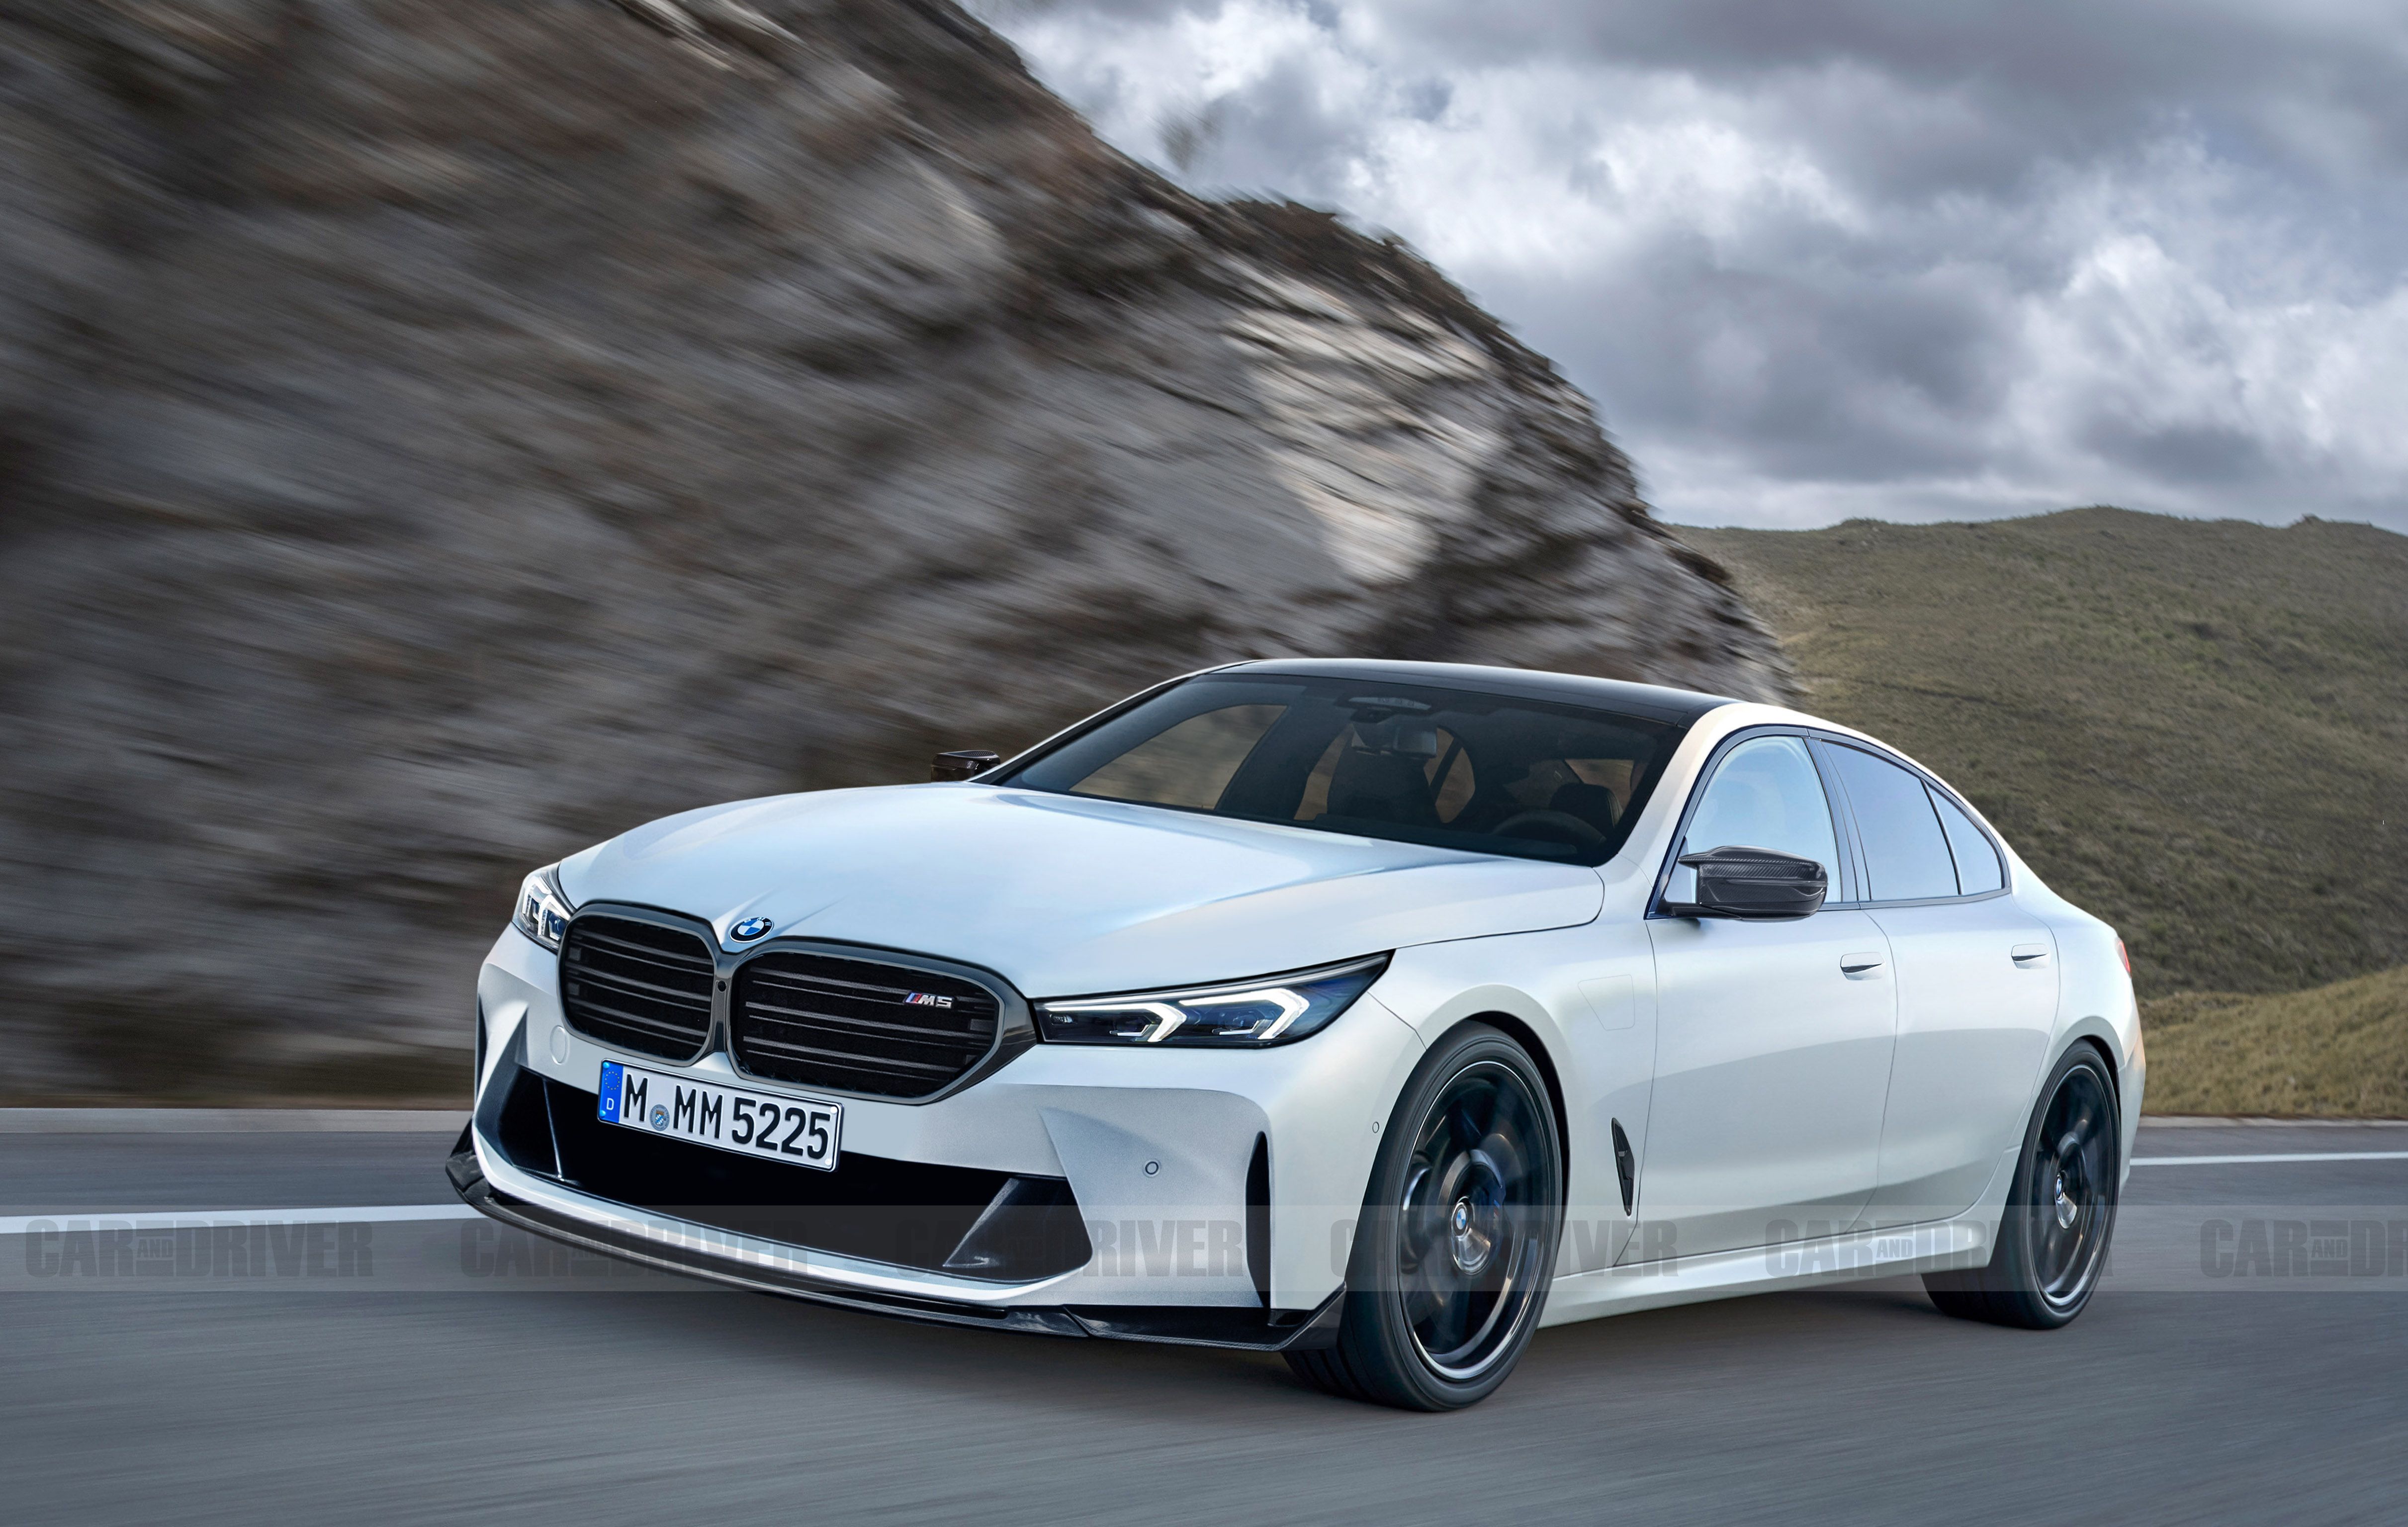 2025 Bmw 5 Series Release Date, Features, Price & Specs  